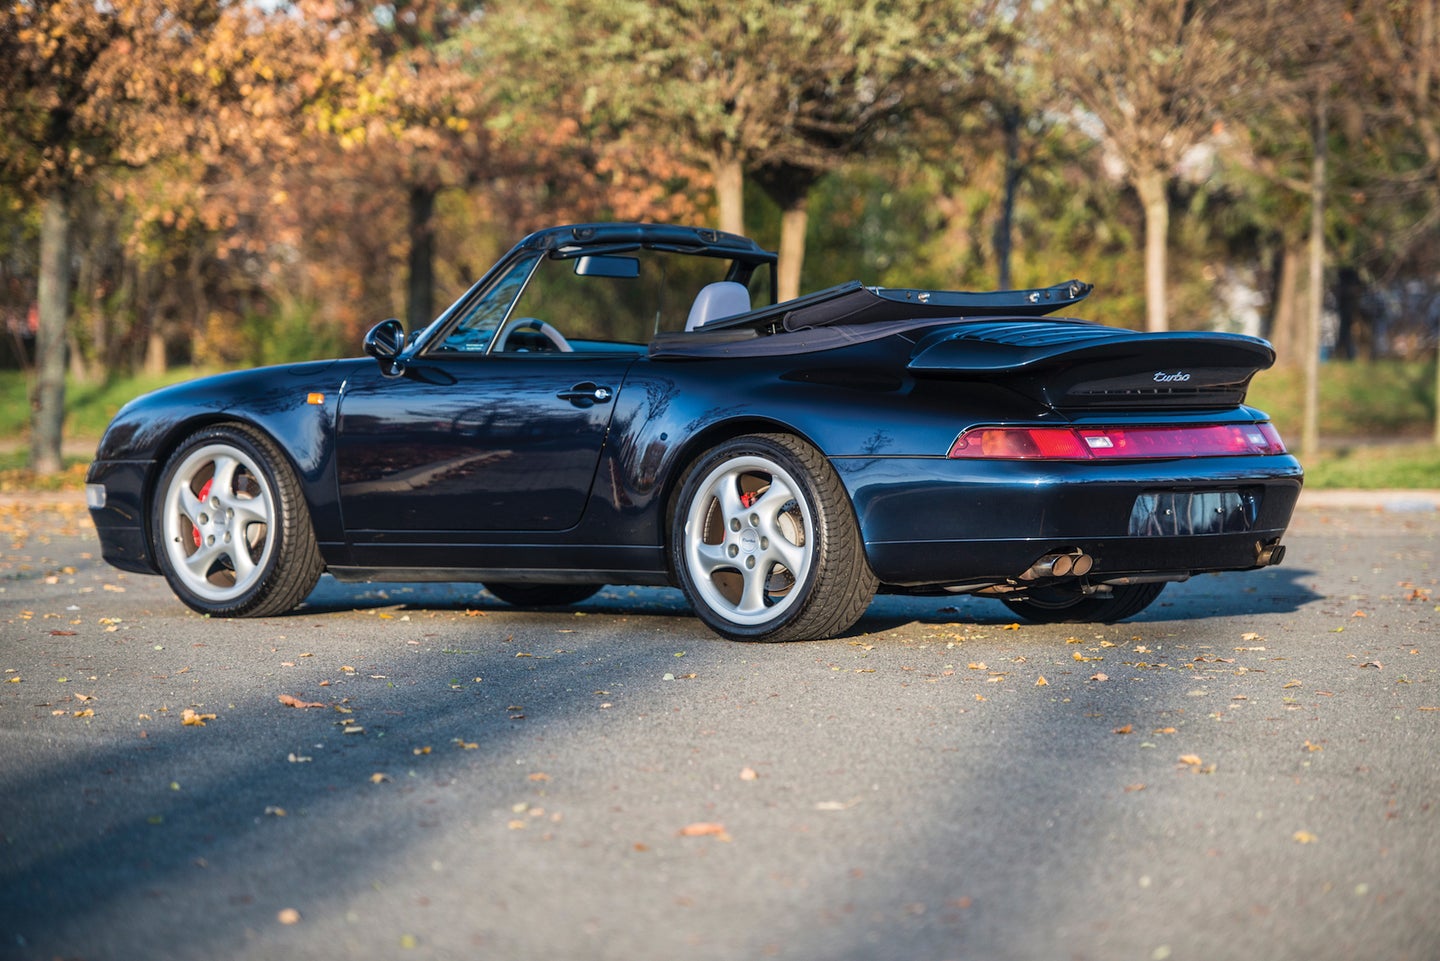 This Porsche 993 Turbo Cabriolet Just Sold for $1.4 Million